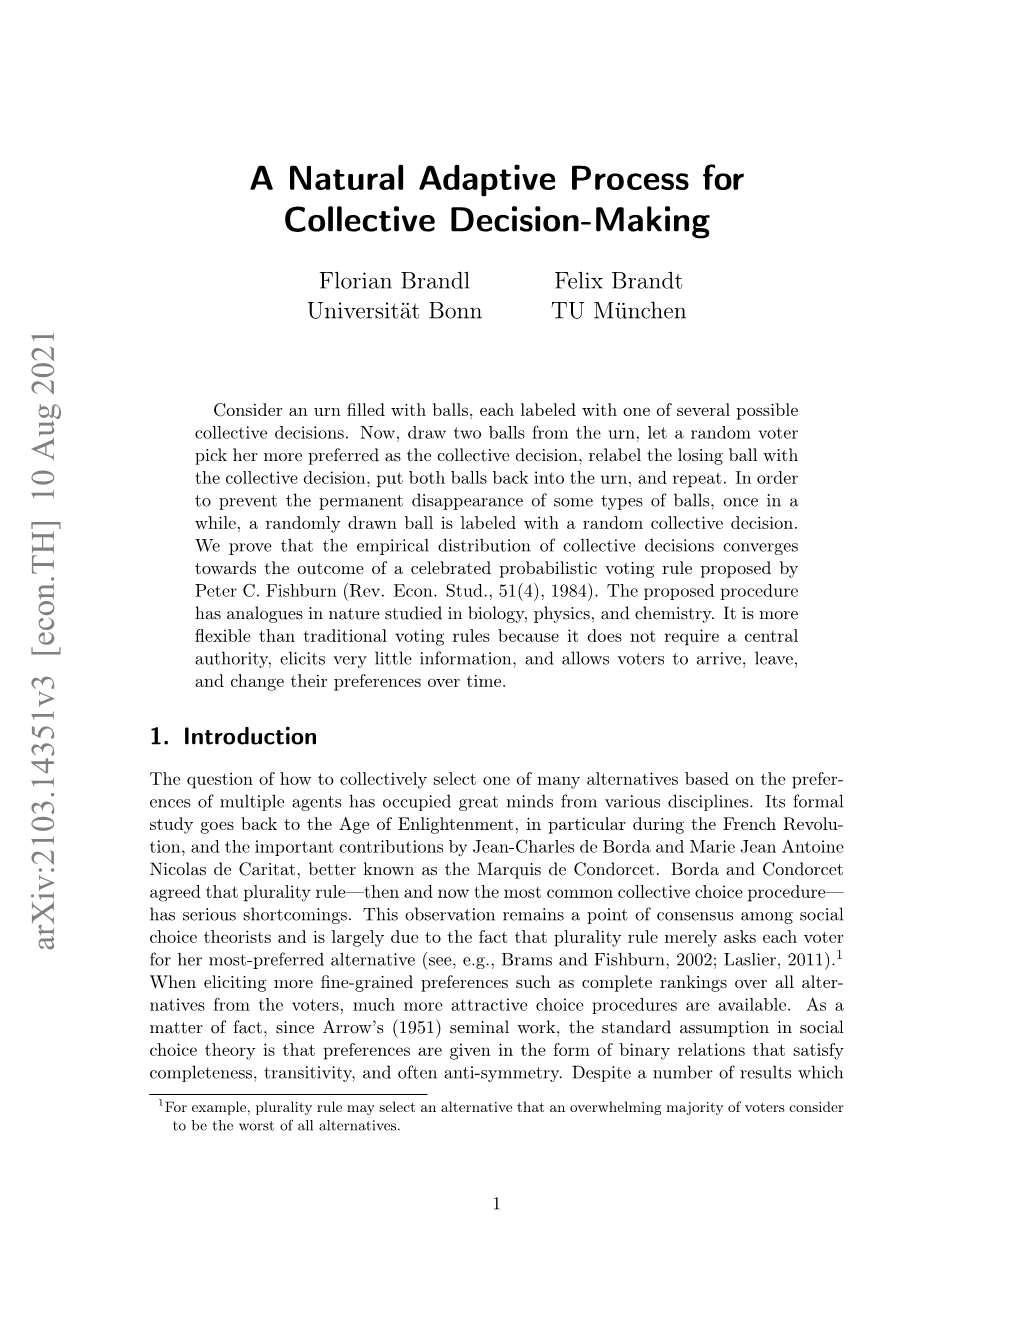 A Natural Adaptive Process for Collective Decision-Making